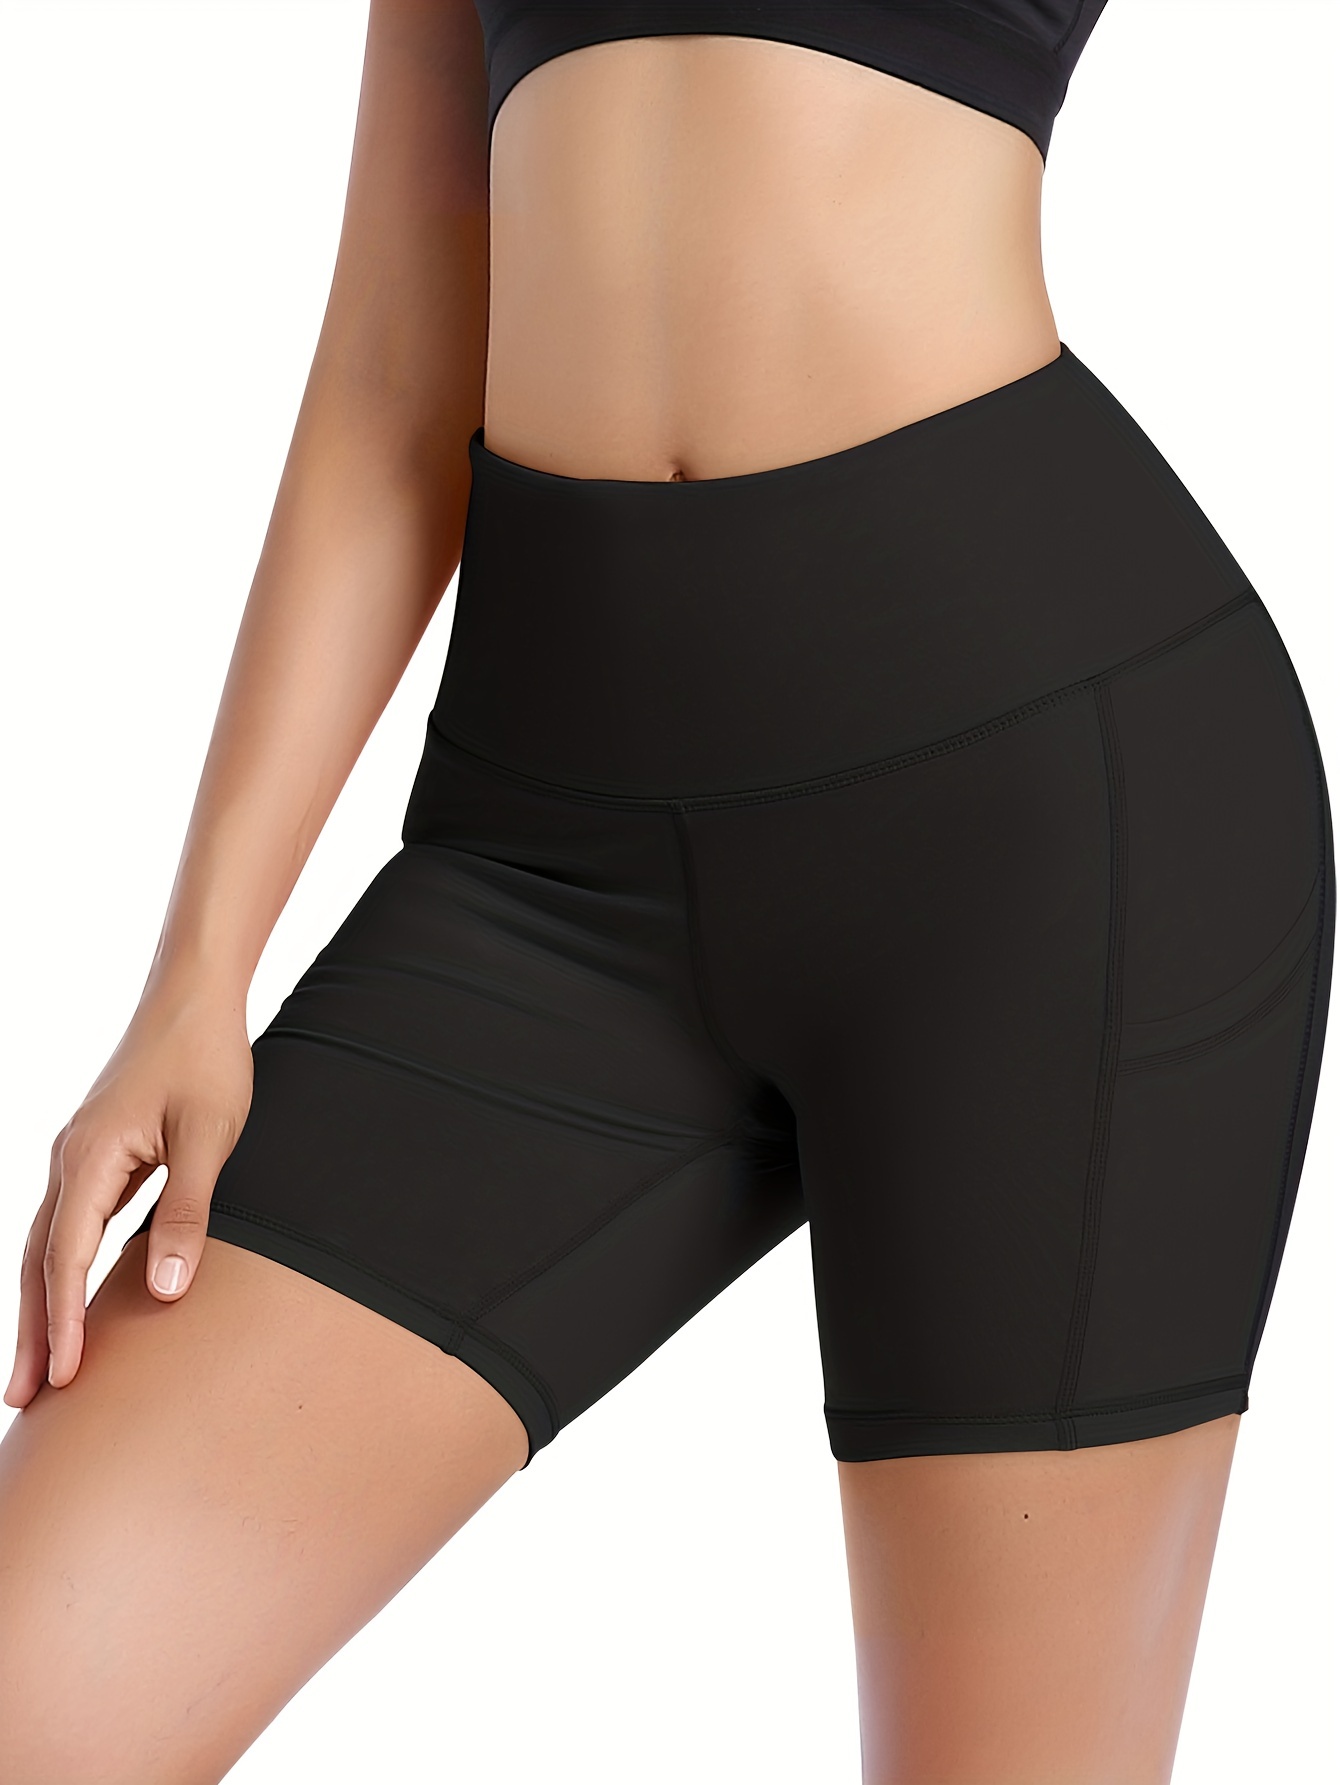 Women Yoga Shorts High Waist Tummy Control Workout Running Athletic Compression  Biker Short Pockets Womens Activewear, 90 Days Buyer Protection